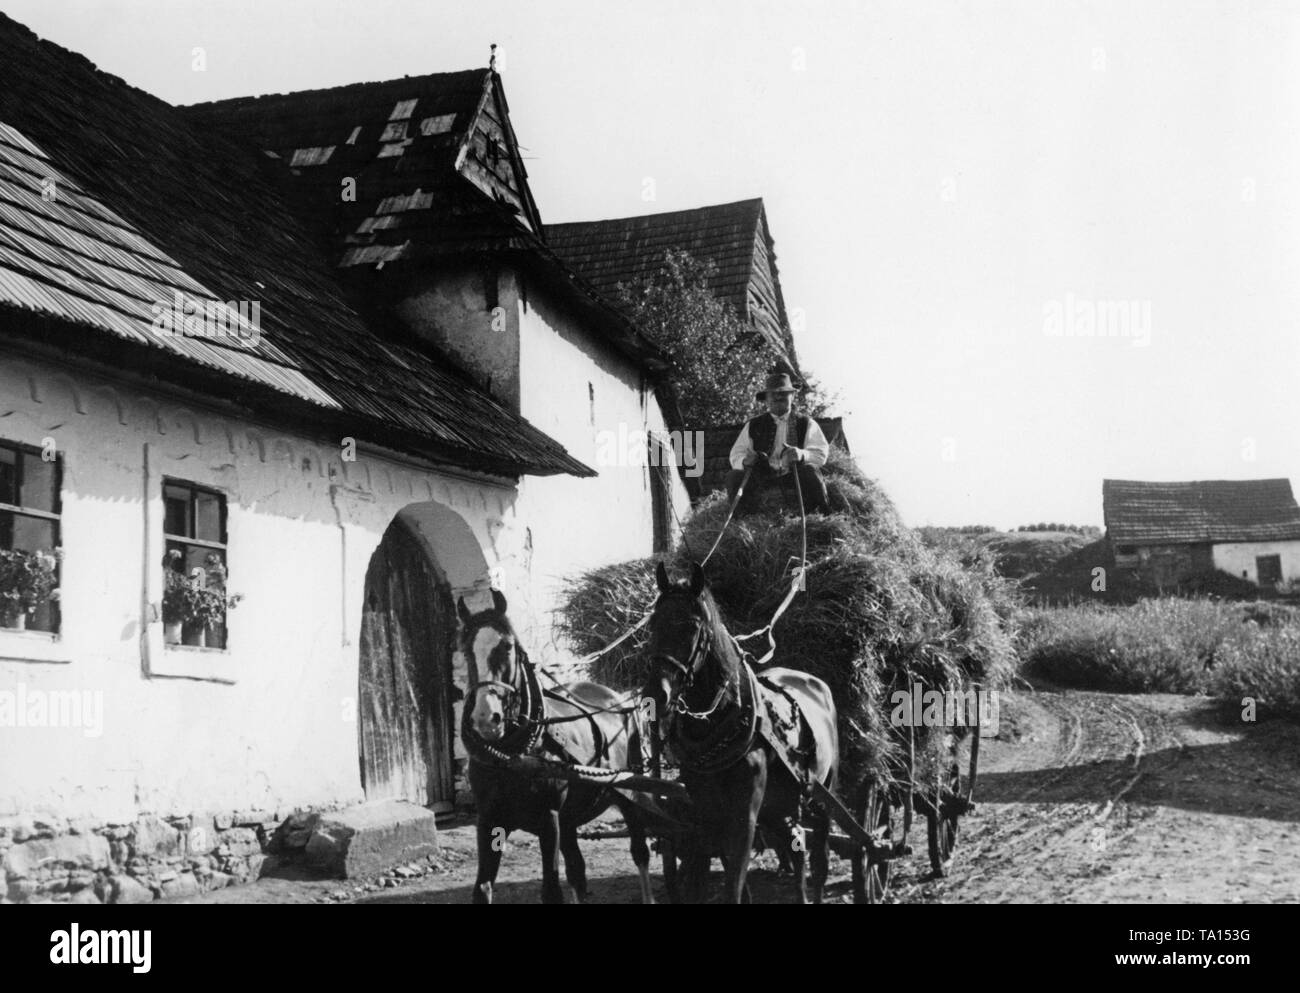 A farmer drives a horse-drawn carriage through a village in the Slovak region of Spis. The scene is from the Tobis documentary 'Zips'. In March 1939, the Slovak State became independent on the command of Adolf Hitler. Stock Photo